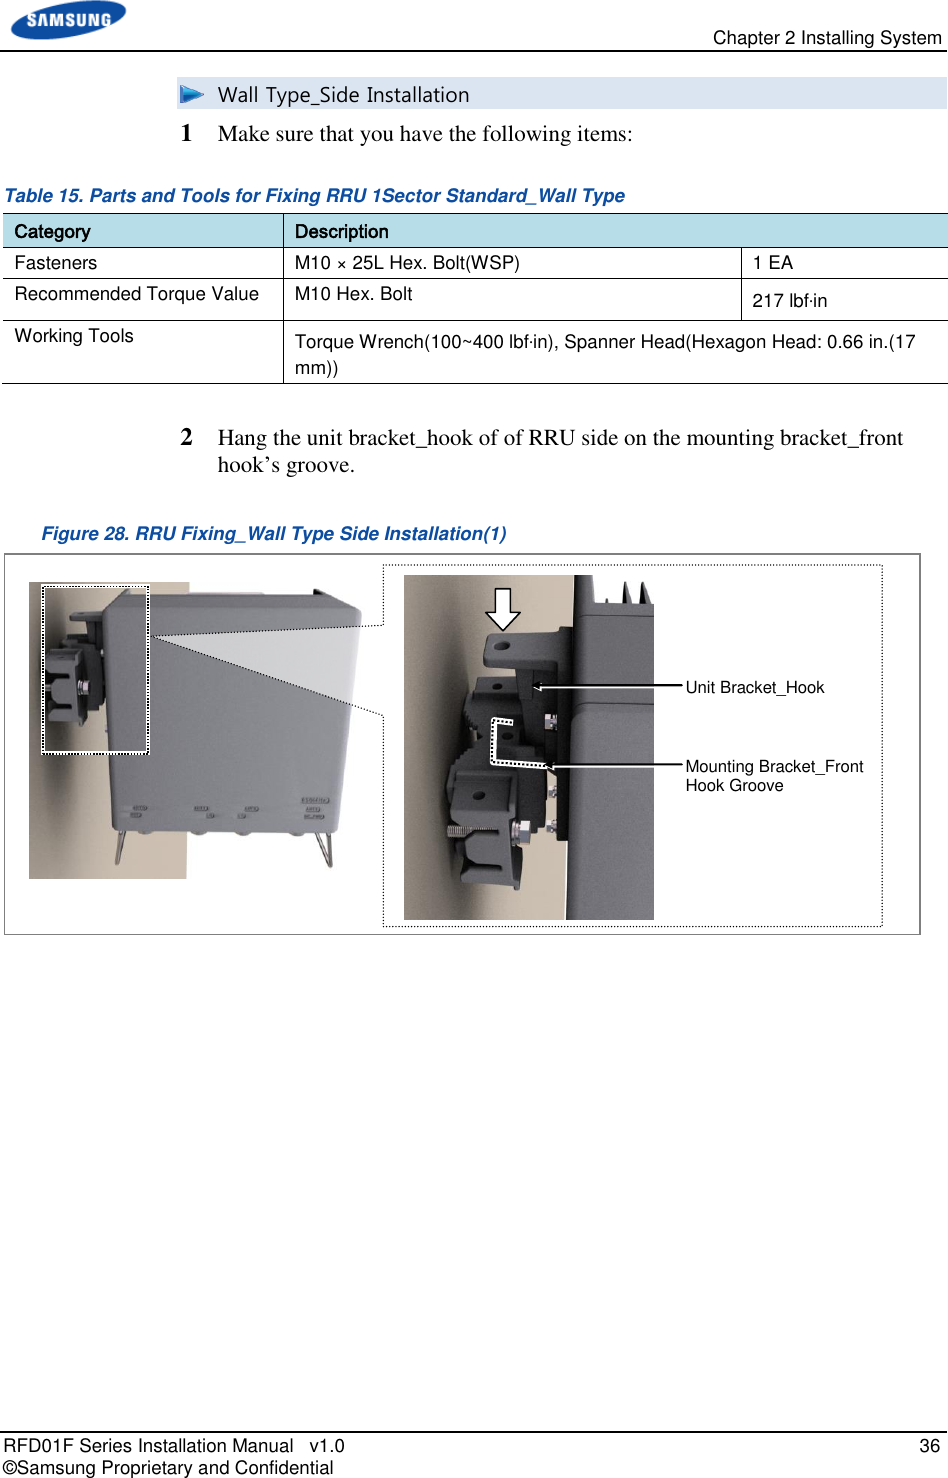   Chapter 2 Installing System RFD01F Series Installation Manual   v1.0   36 © Samsung Proprietary and Confidential  Wall Type_Side Installation 1  Make sure that you have the following items: Table 15. Parts and Tools for Fixing RRU 1Sector Standard_Wall Type Category Description Fasteners M10 × 25L Hex. Bolt(WSP) 1 EA Recommended Torque Value M10 Hex. Bolt 217 lbf·in Working Tools Torque Wrench(100~400 lbf·in), Spanner Head(Hexagon Head: 0.66 in.(17 mm))  2  Hang the unit bracket_hook of of RRU side on the mounting bracket_front hook’s groove. Figure 28. RRU Fixing_Wall Type Side Installation(1)      Unit Bracket_Hook Mounting Bracket_Front Hook Groove 